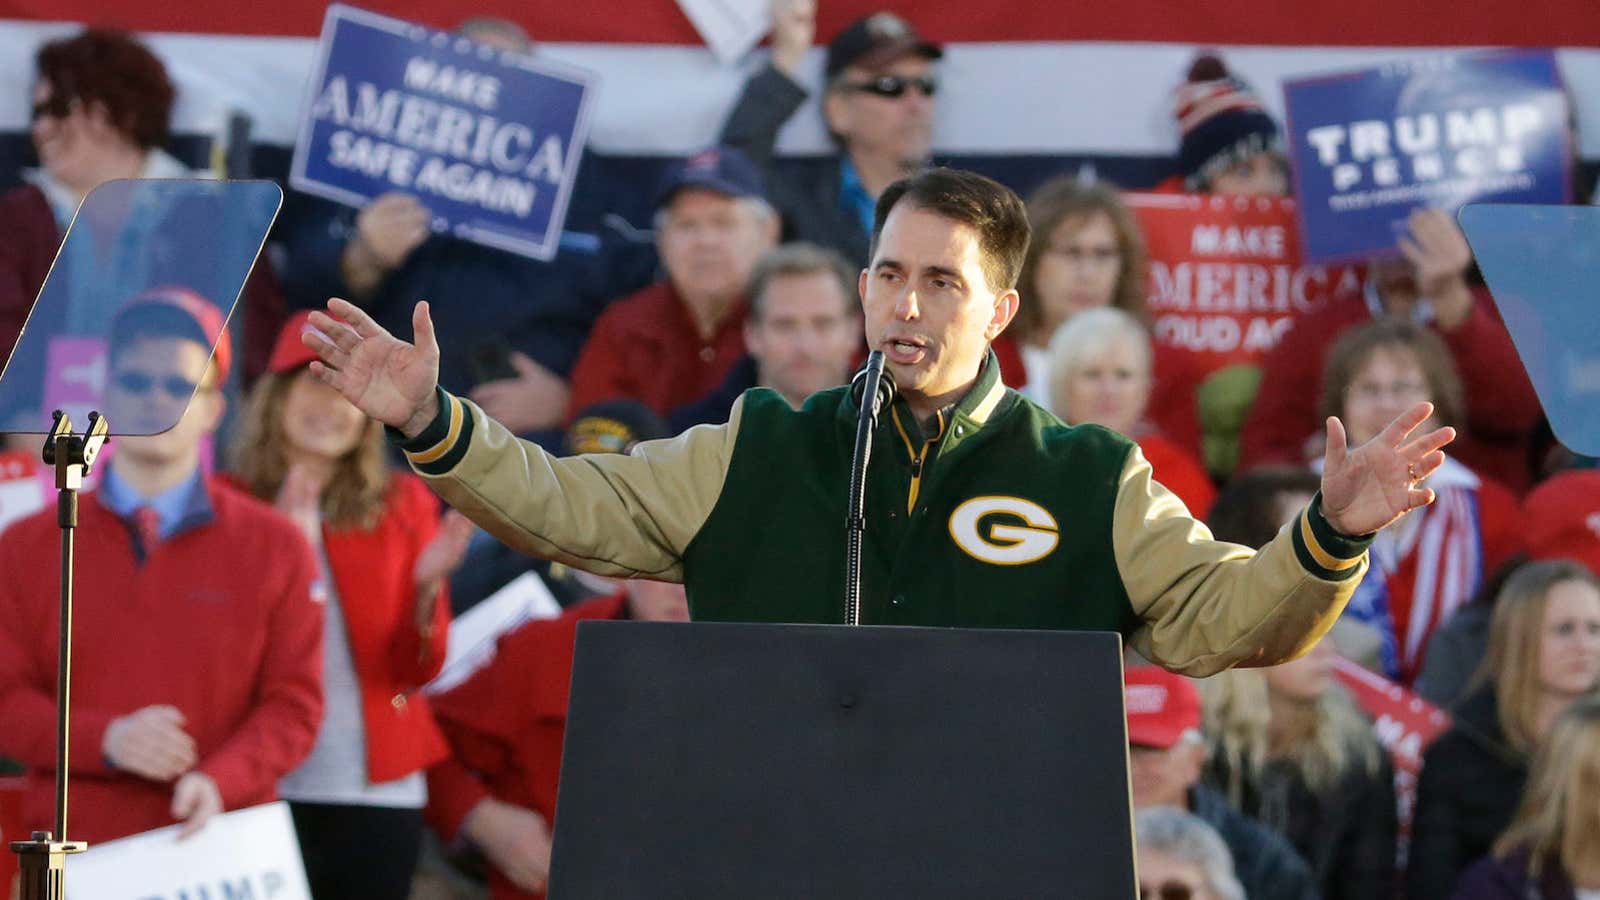 Walker claimed to be “the pro-education governor.”